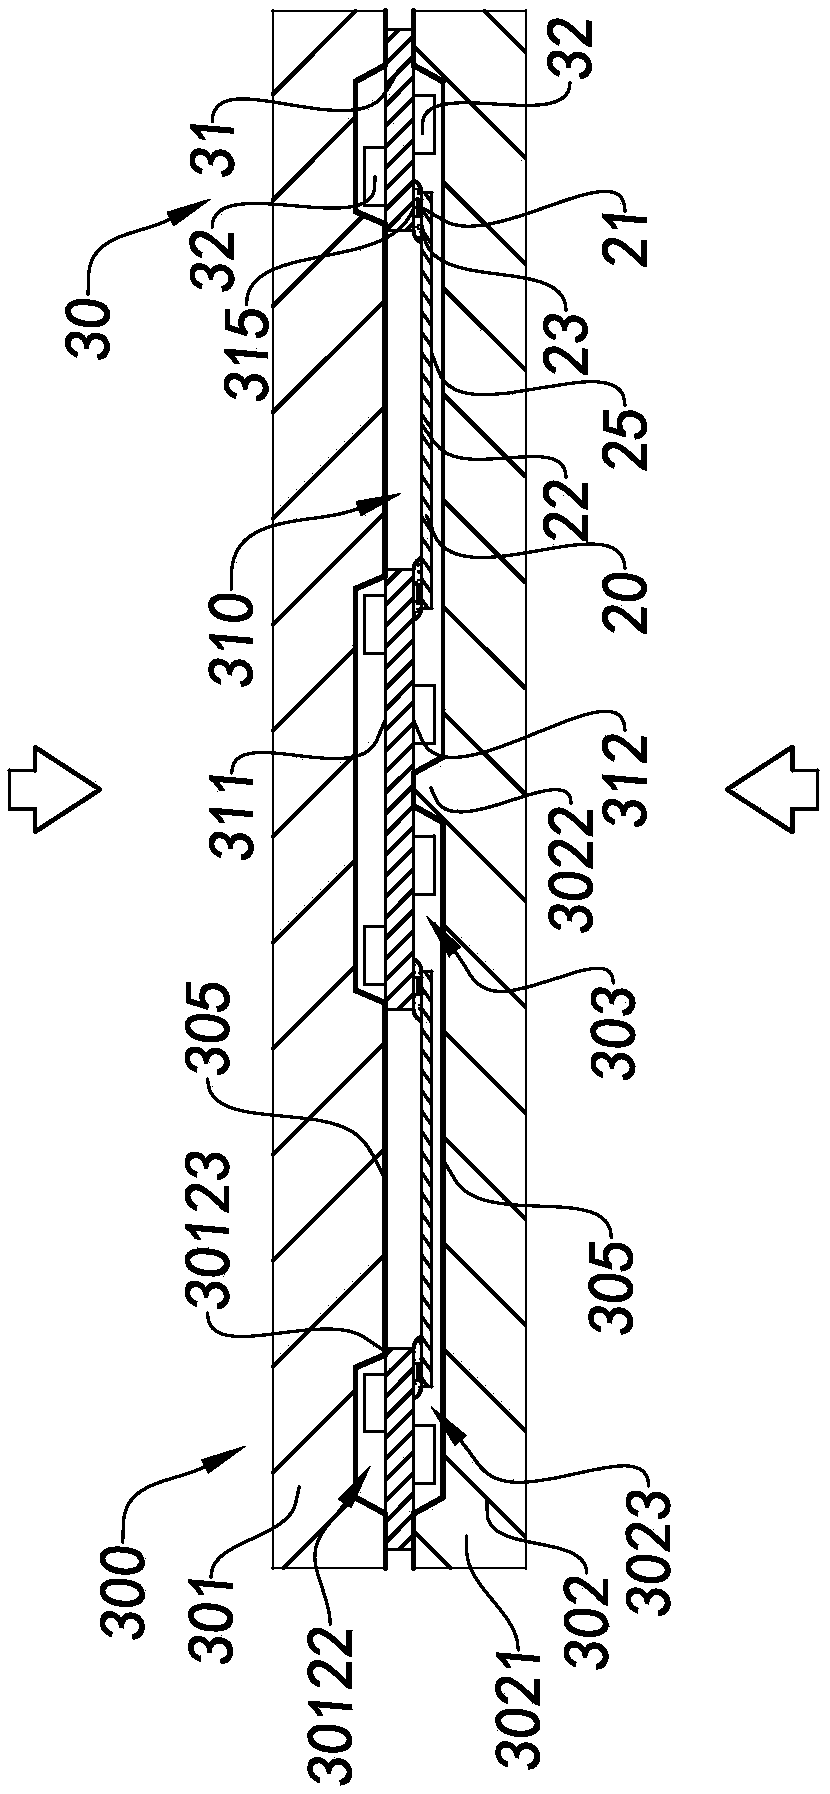 Image pick-up module set, molded circuit board assembly thereof, molded circuit board assembly semi-finished product, manufacturing method and electronic device